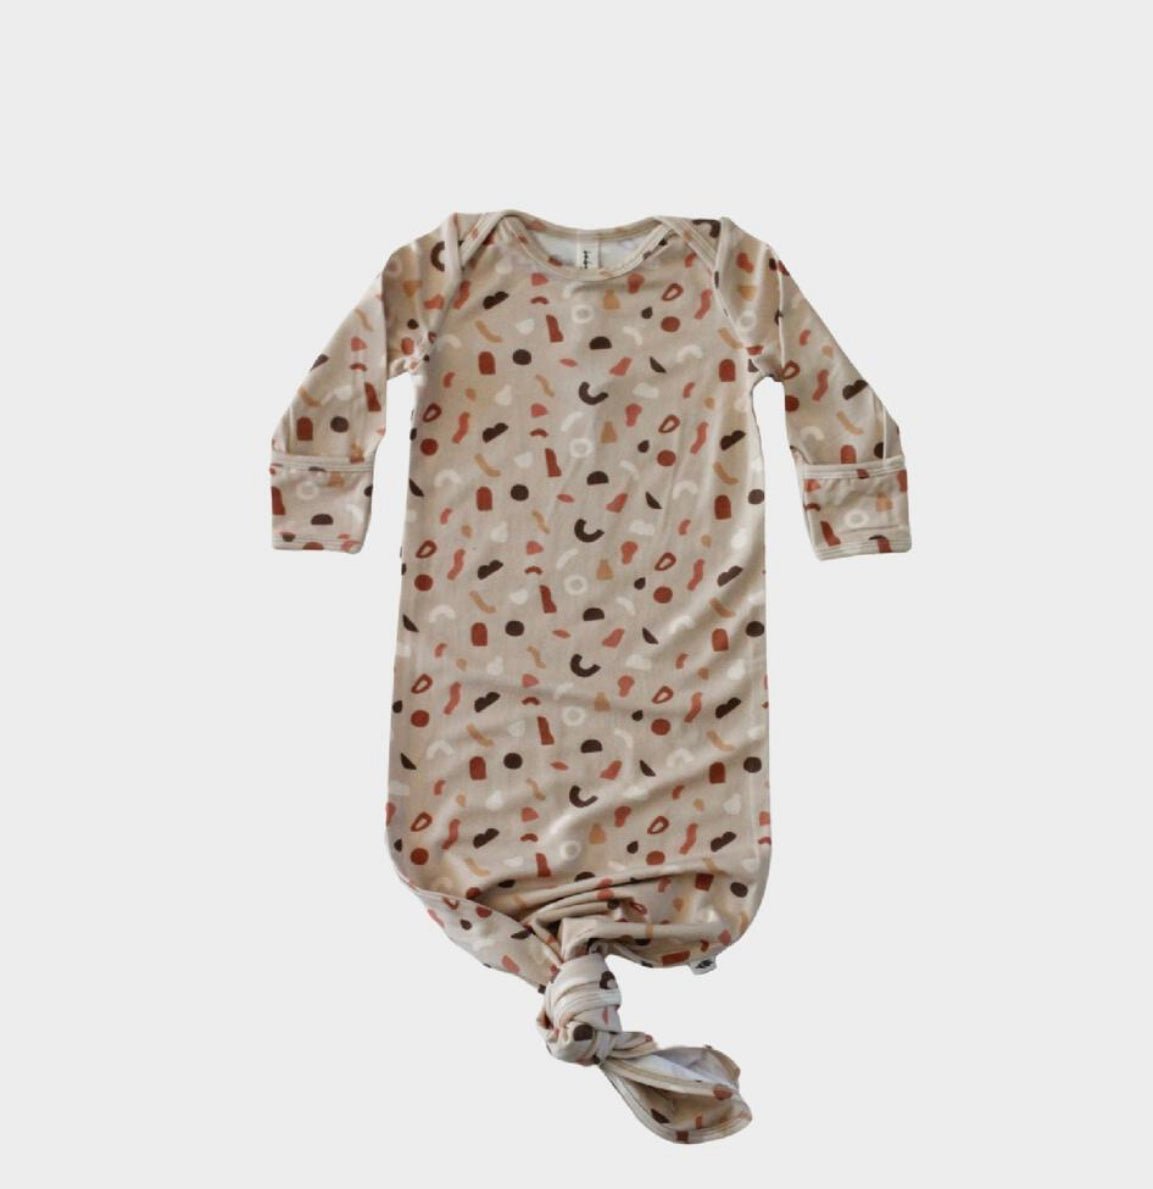 Abstract Shapes Knotted Onesie - The Bump & Company LLC